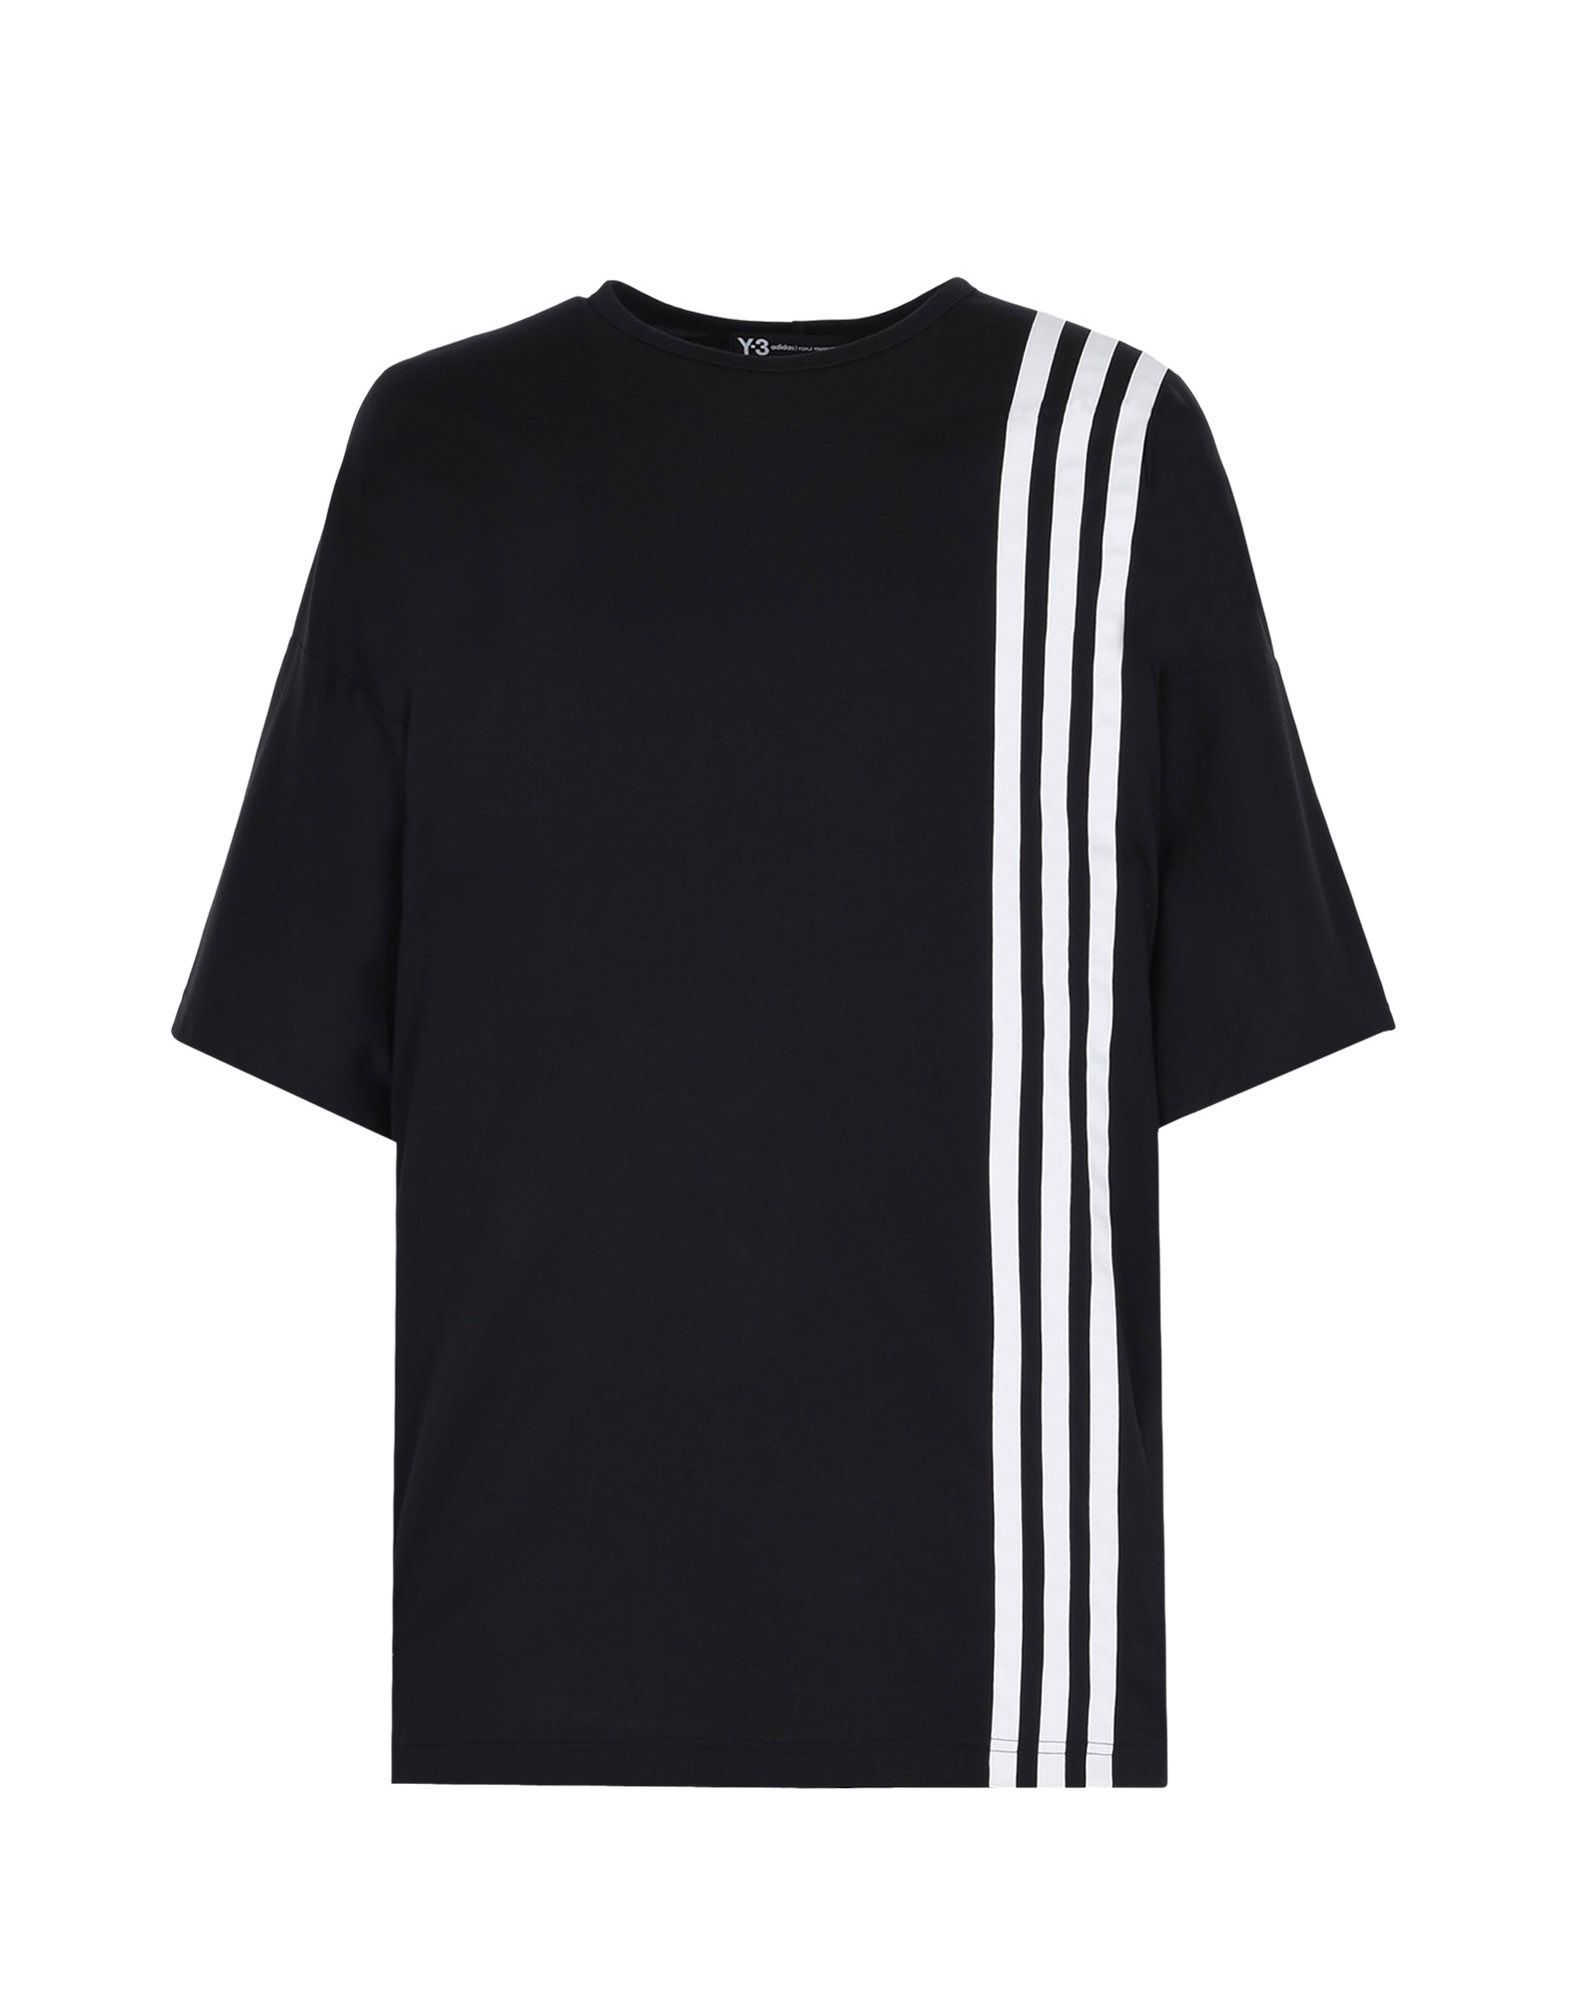 Y 3 3 STRIPES TEE ‎ ‎Short Sleeve t Shirts‎ ‎ ‎ | Adidas Y-3 Official Site